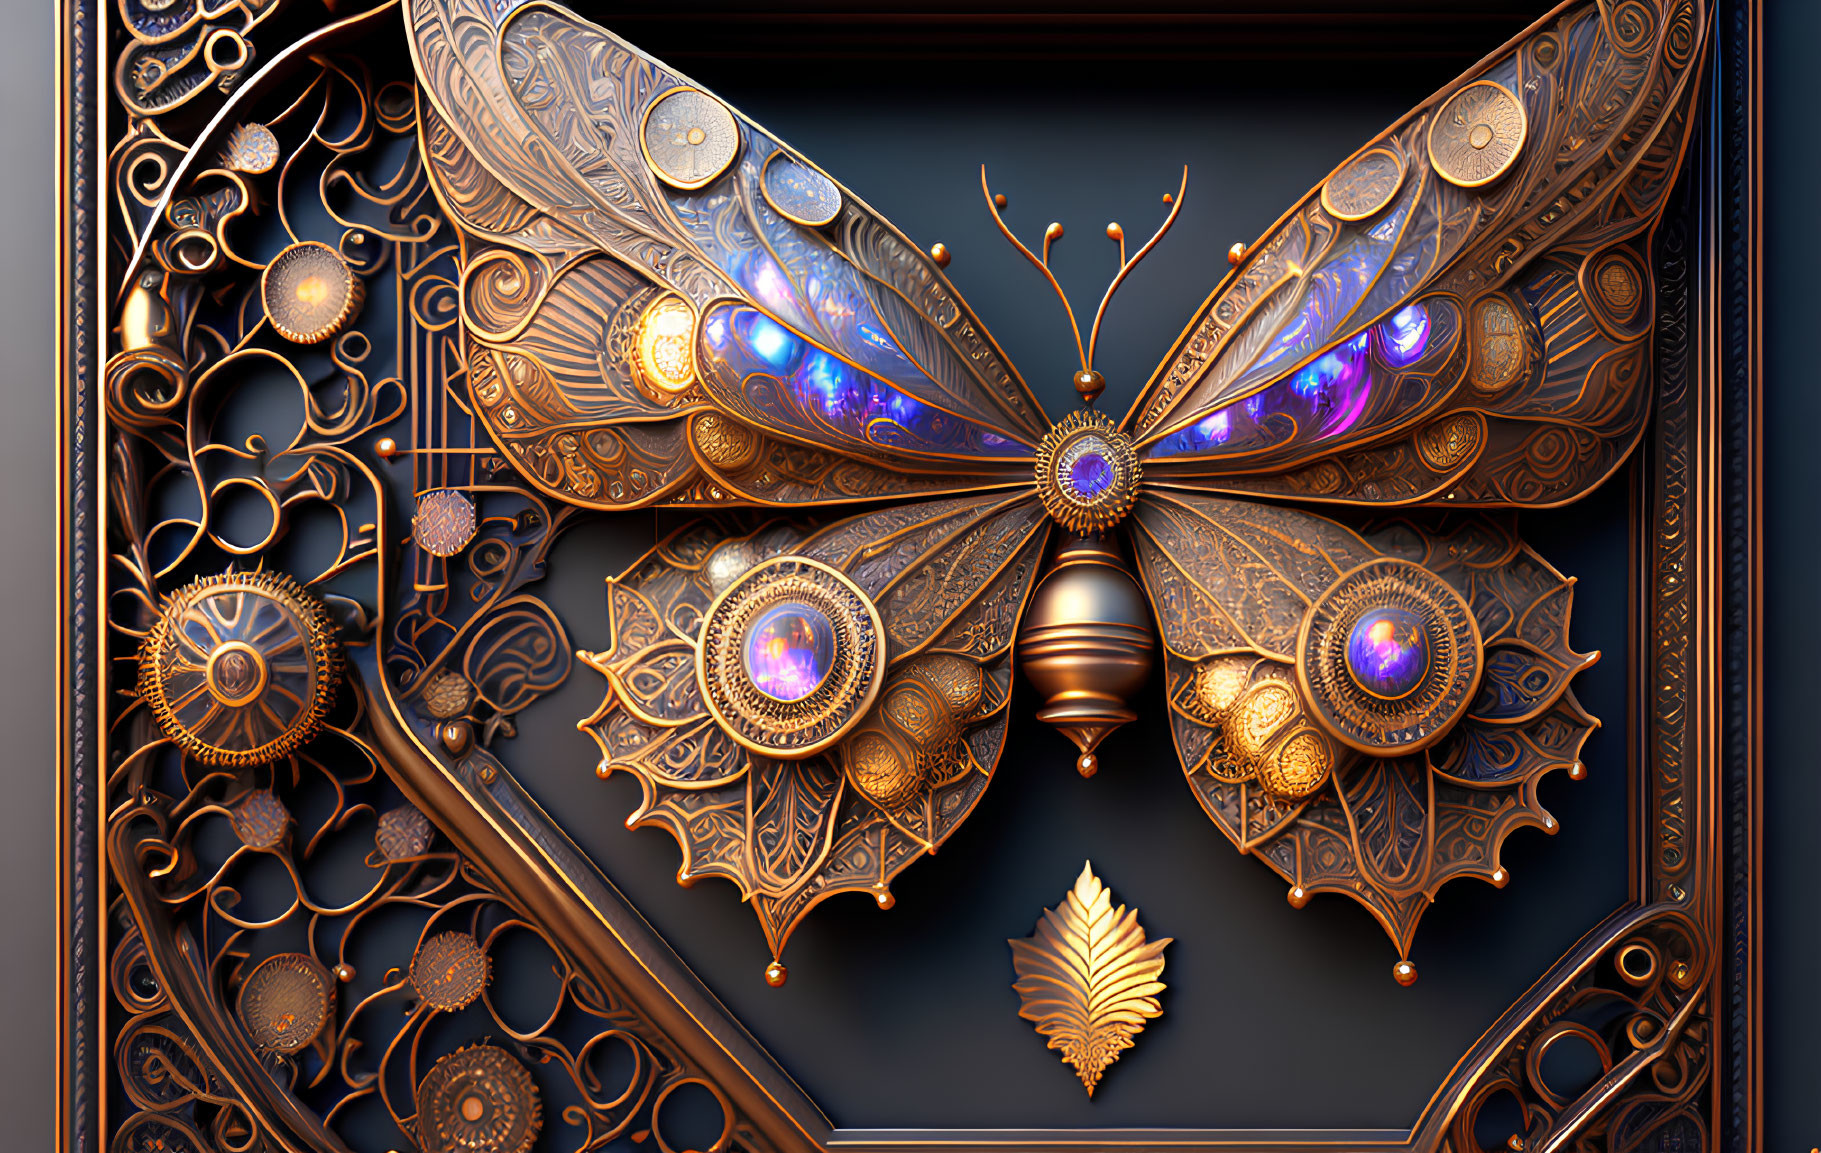 Steampunk-style butterfly with metallic wings and purple gemstones on dark background